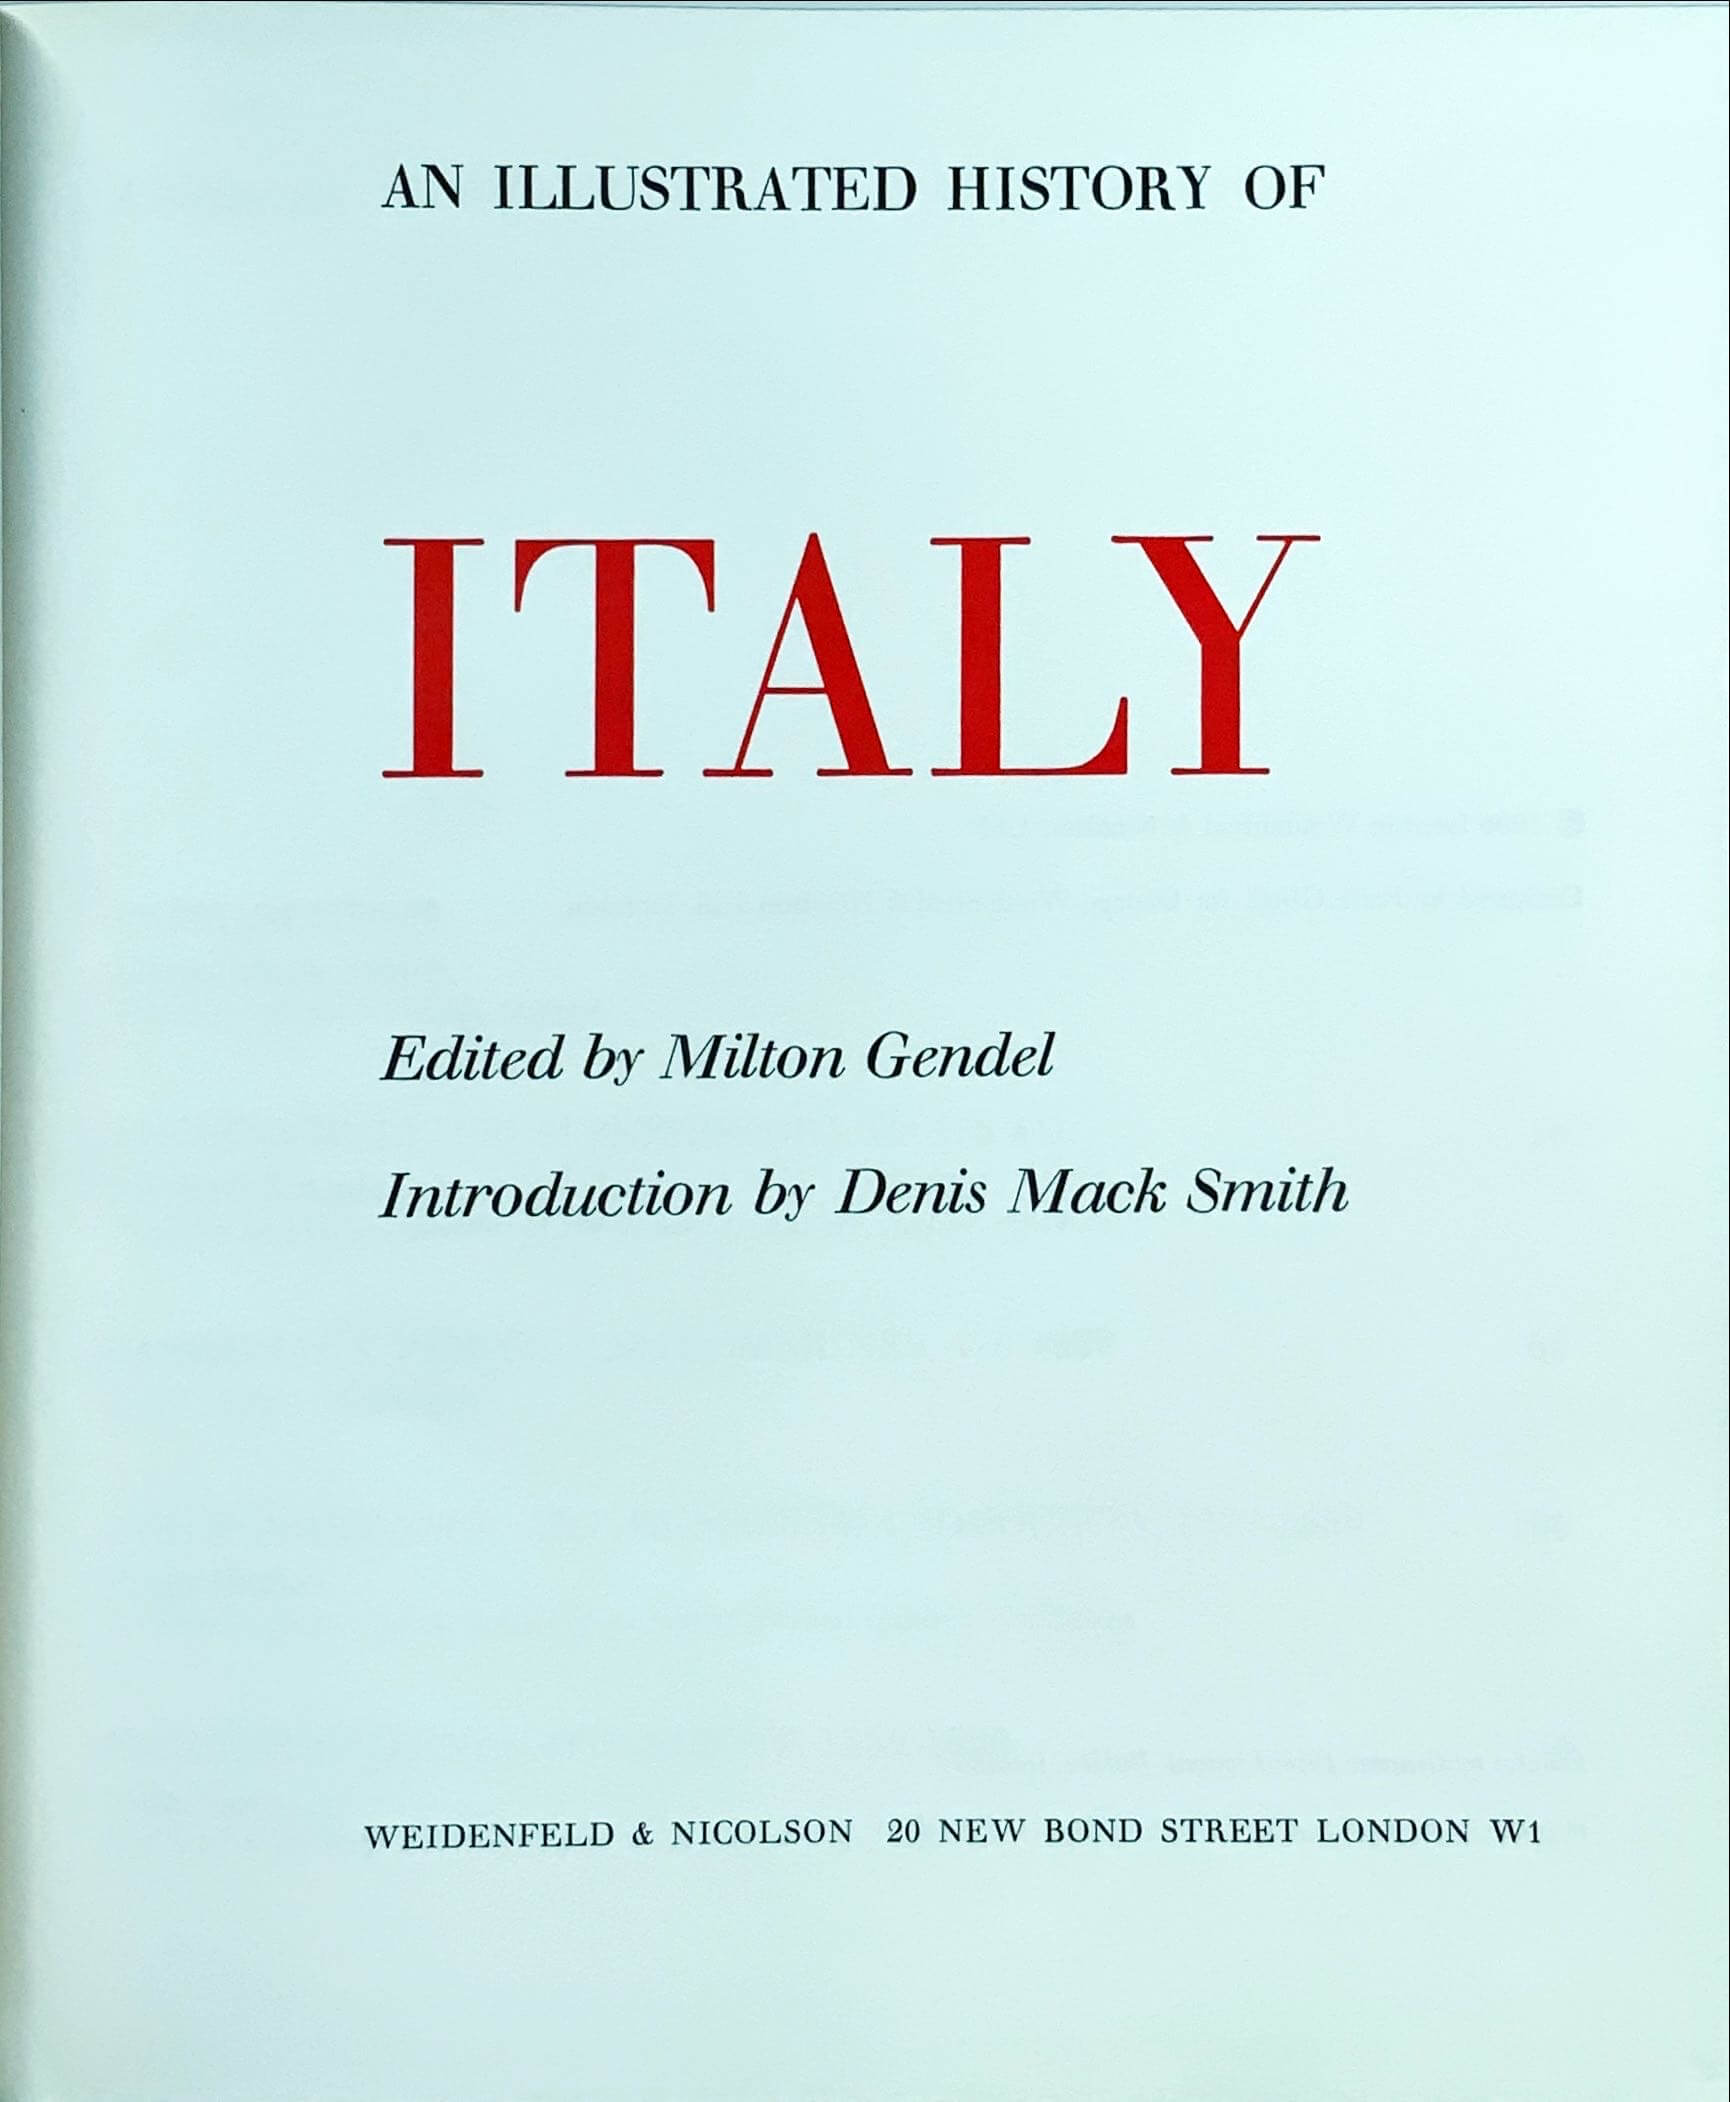 Conzett & Huber: Italy, An Illustrated History. 1966